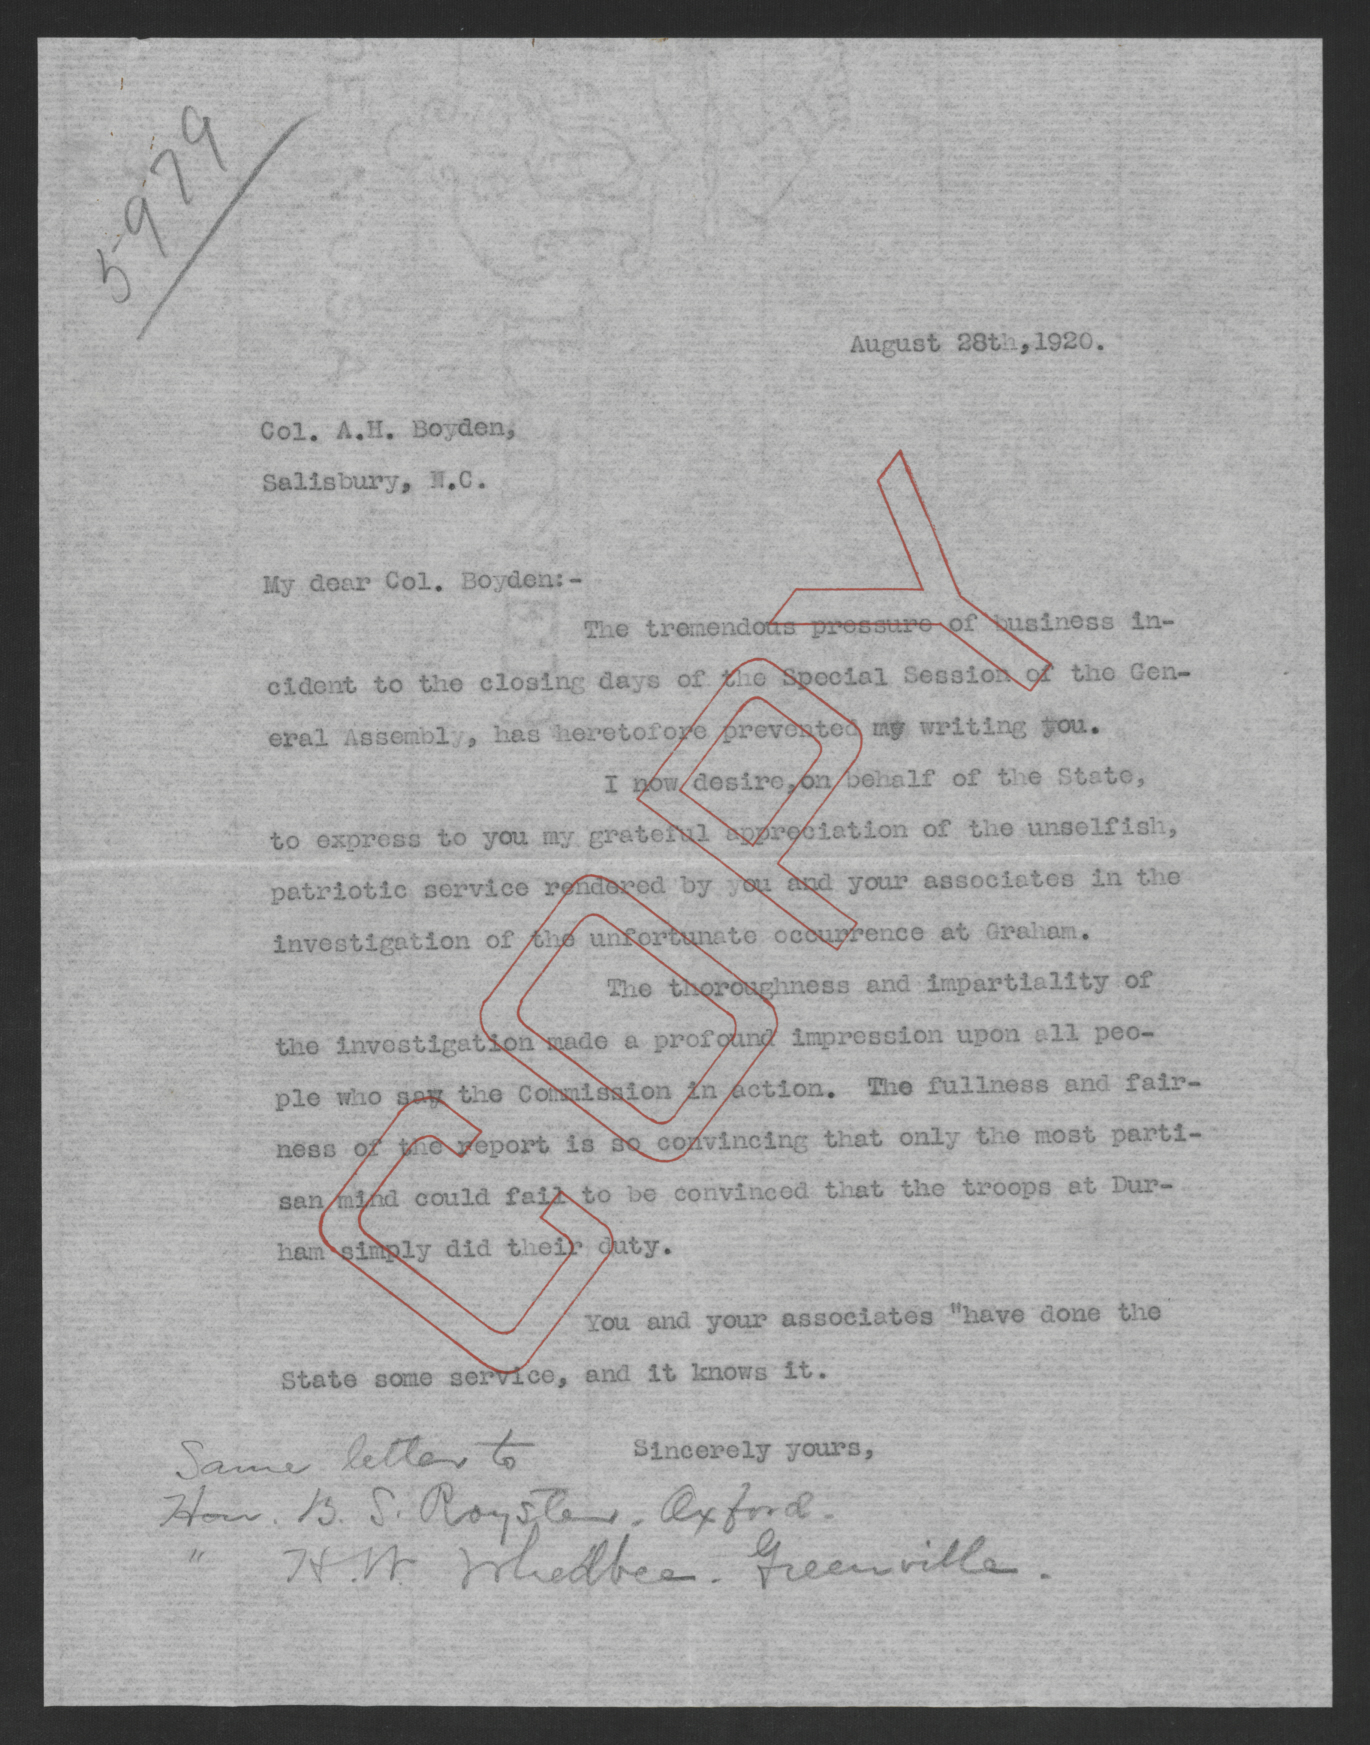 Letter from Thomas W. Bickett to Archibald H. Boyden, August 28, 1920